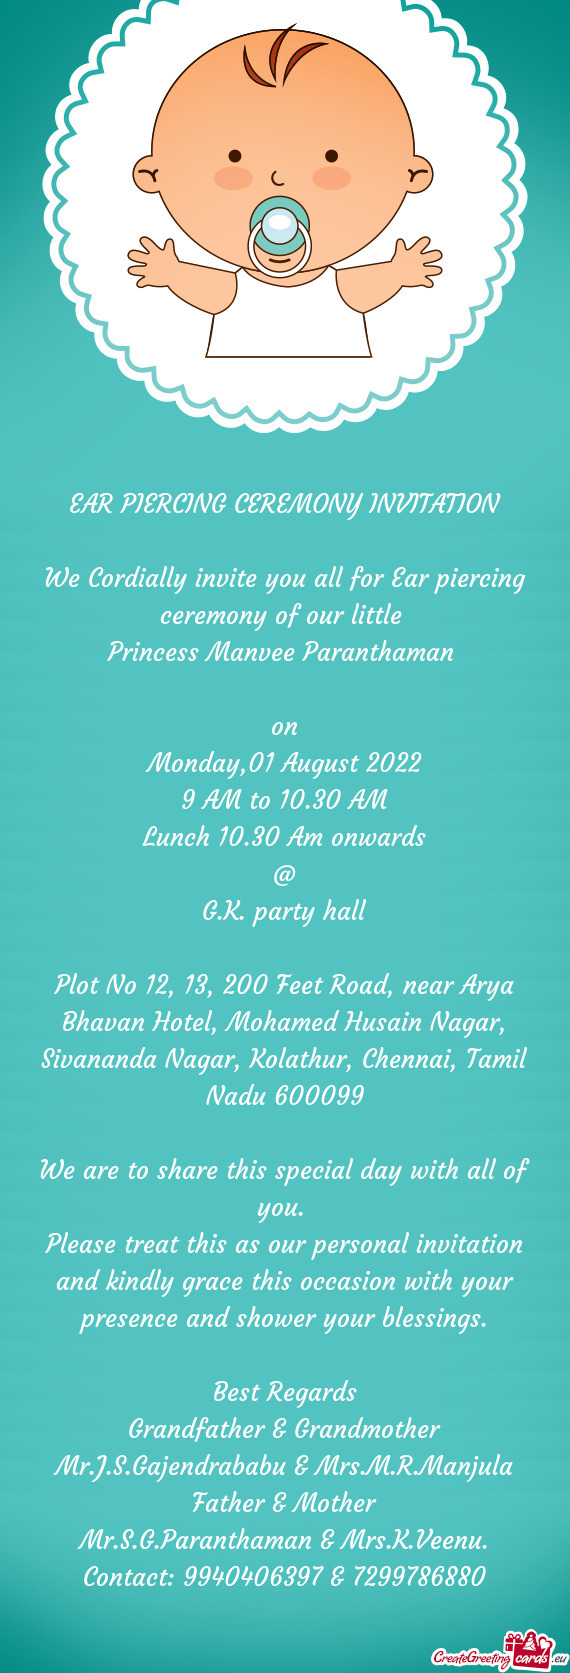 We Cordially invite you all for Ear piercing ceremony of our little